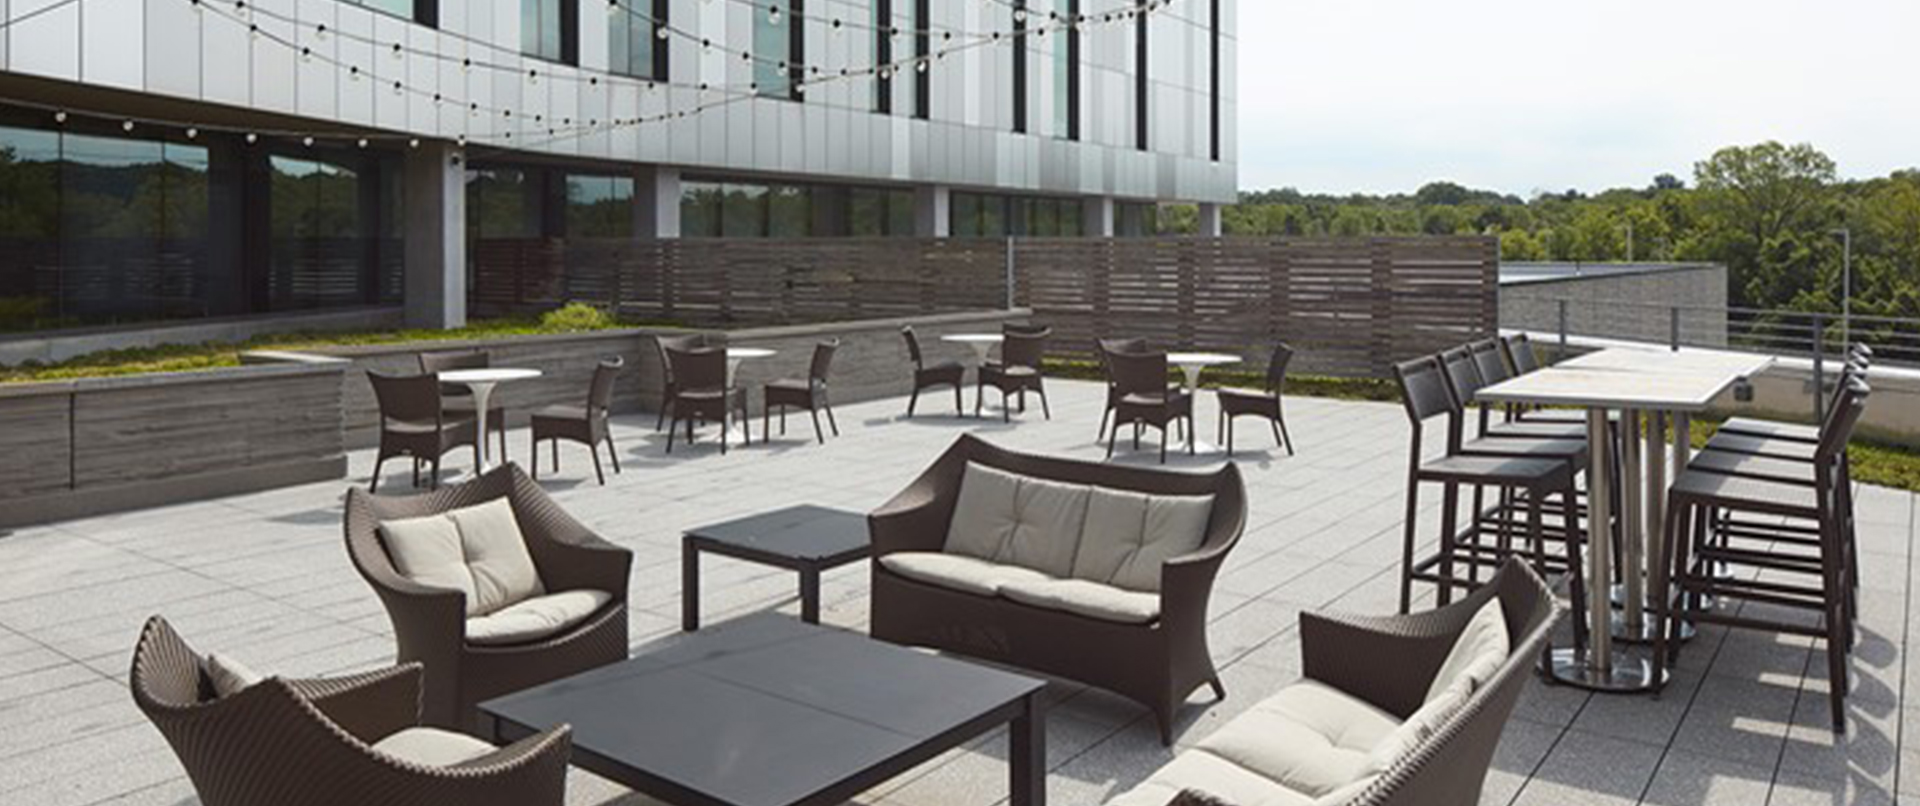 Modern Rooftop Seating Area